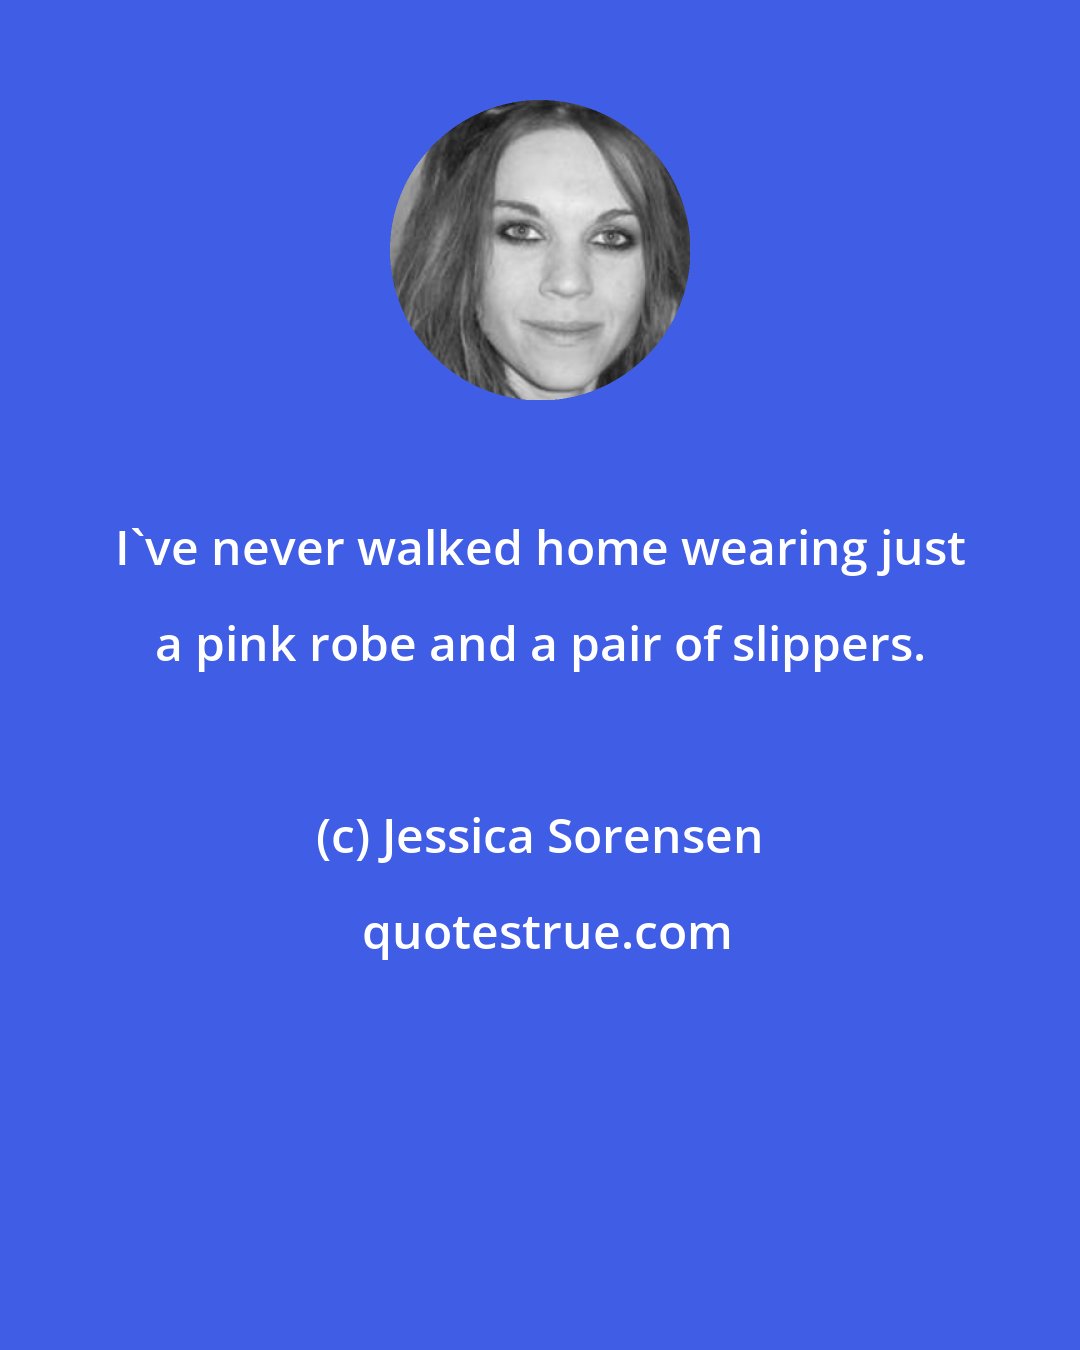 Jessica Sorensen: I've never walked home wearing just a pink robe and a pair of slippers.